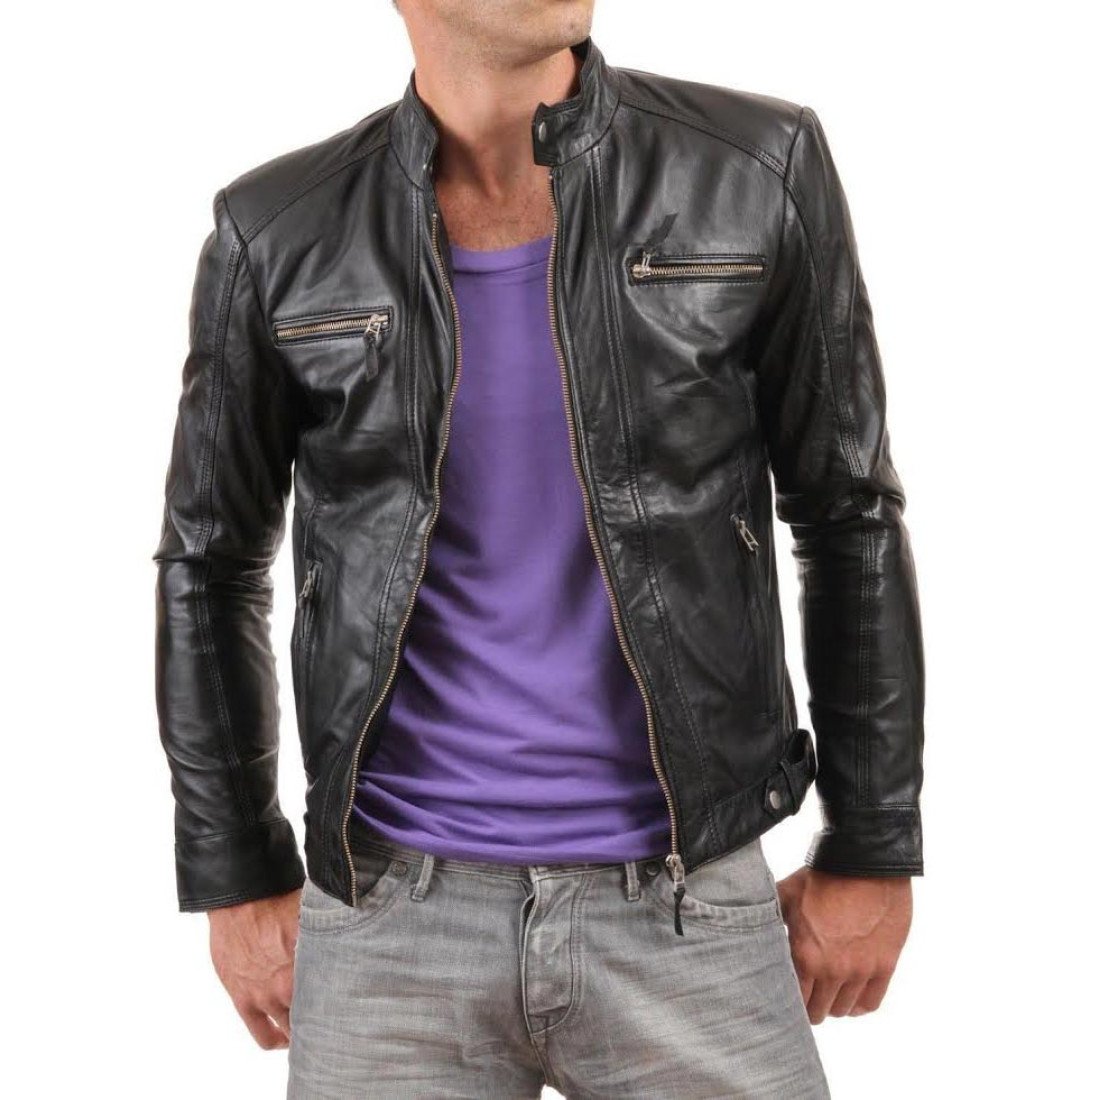 Men's Snap Button Causal Black Leather Jacket - Films Jackets